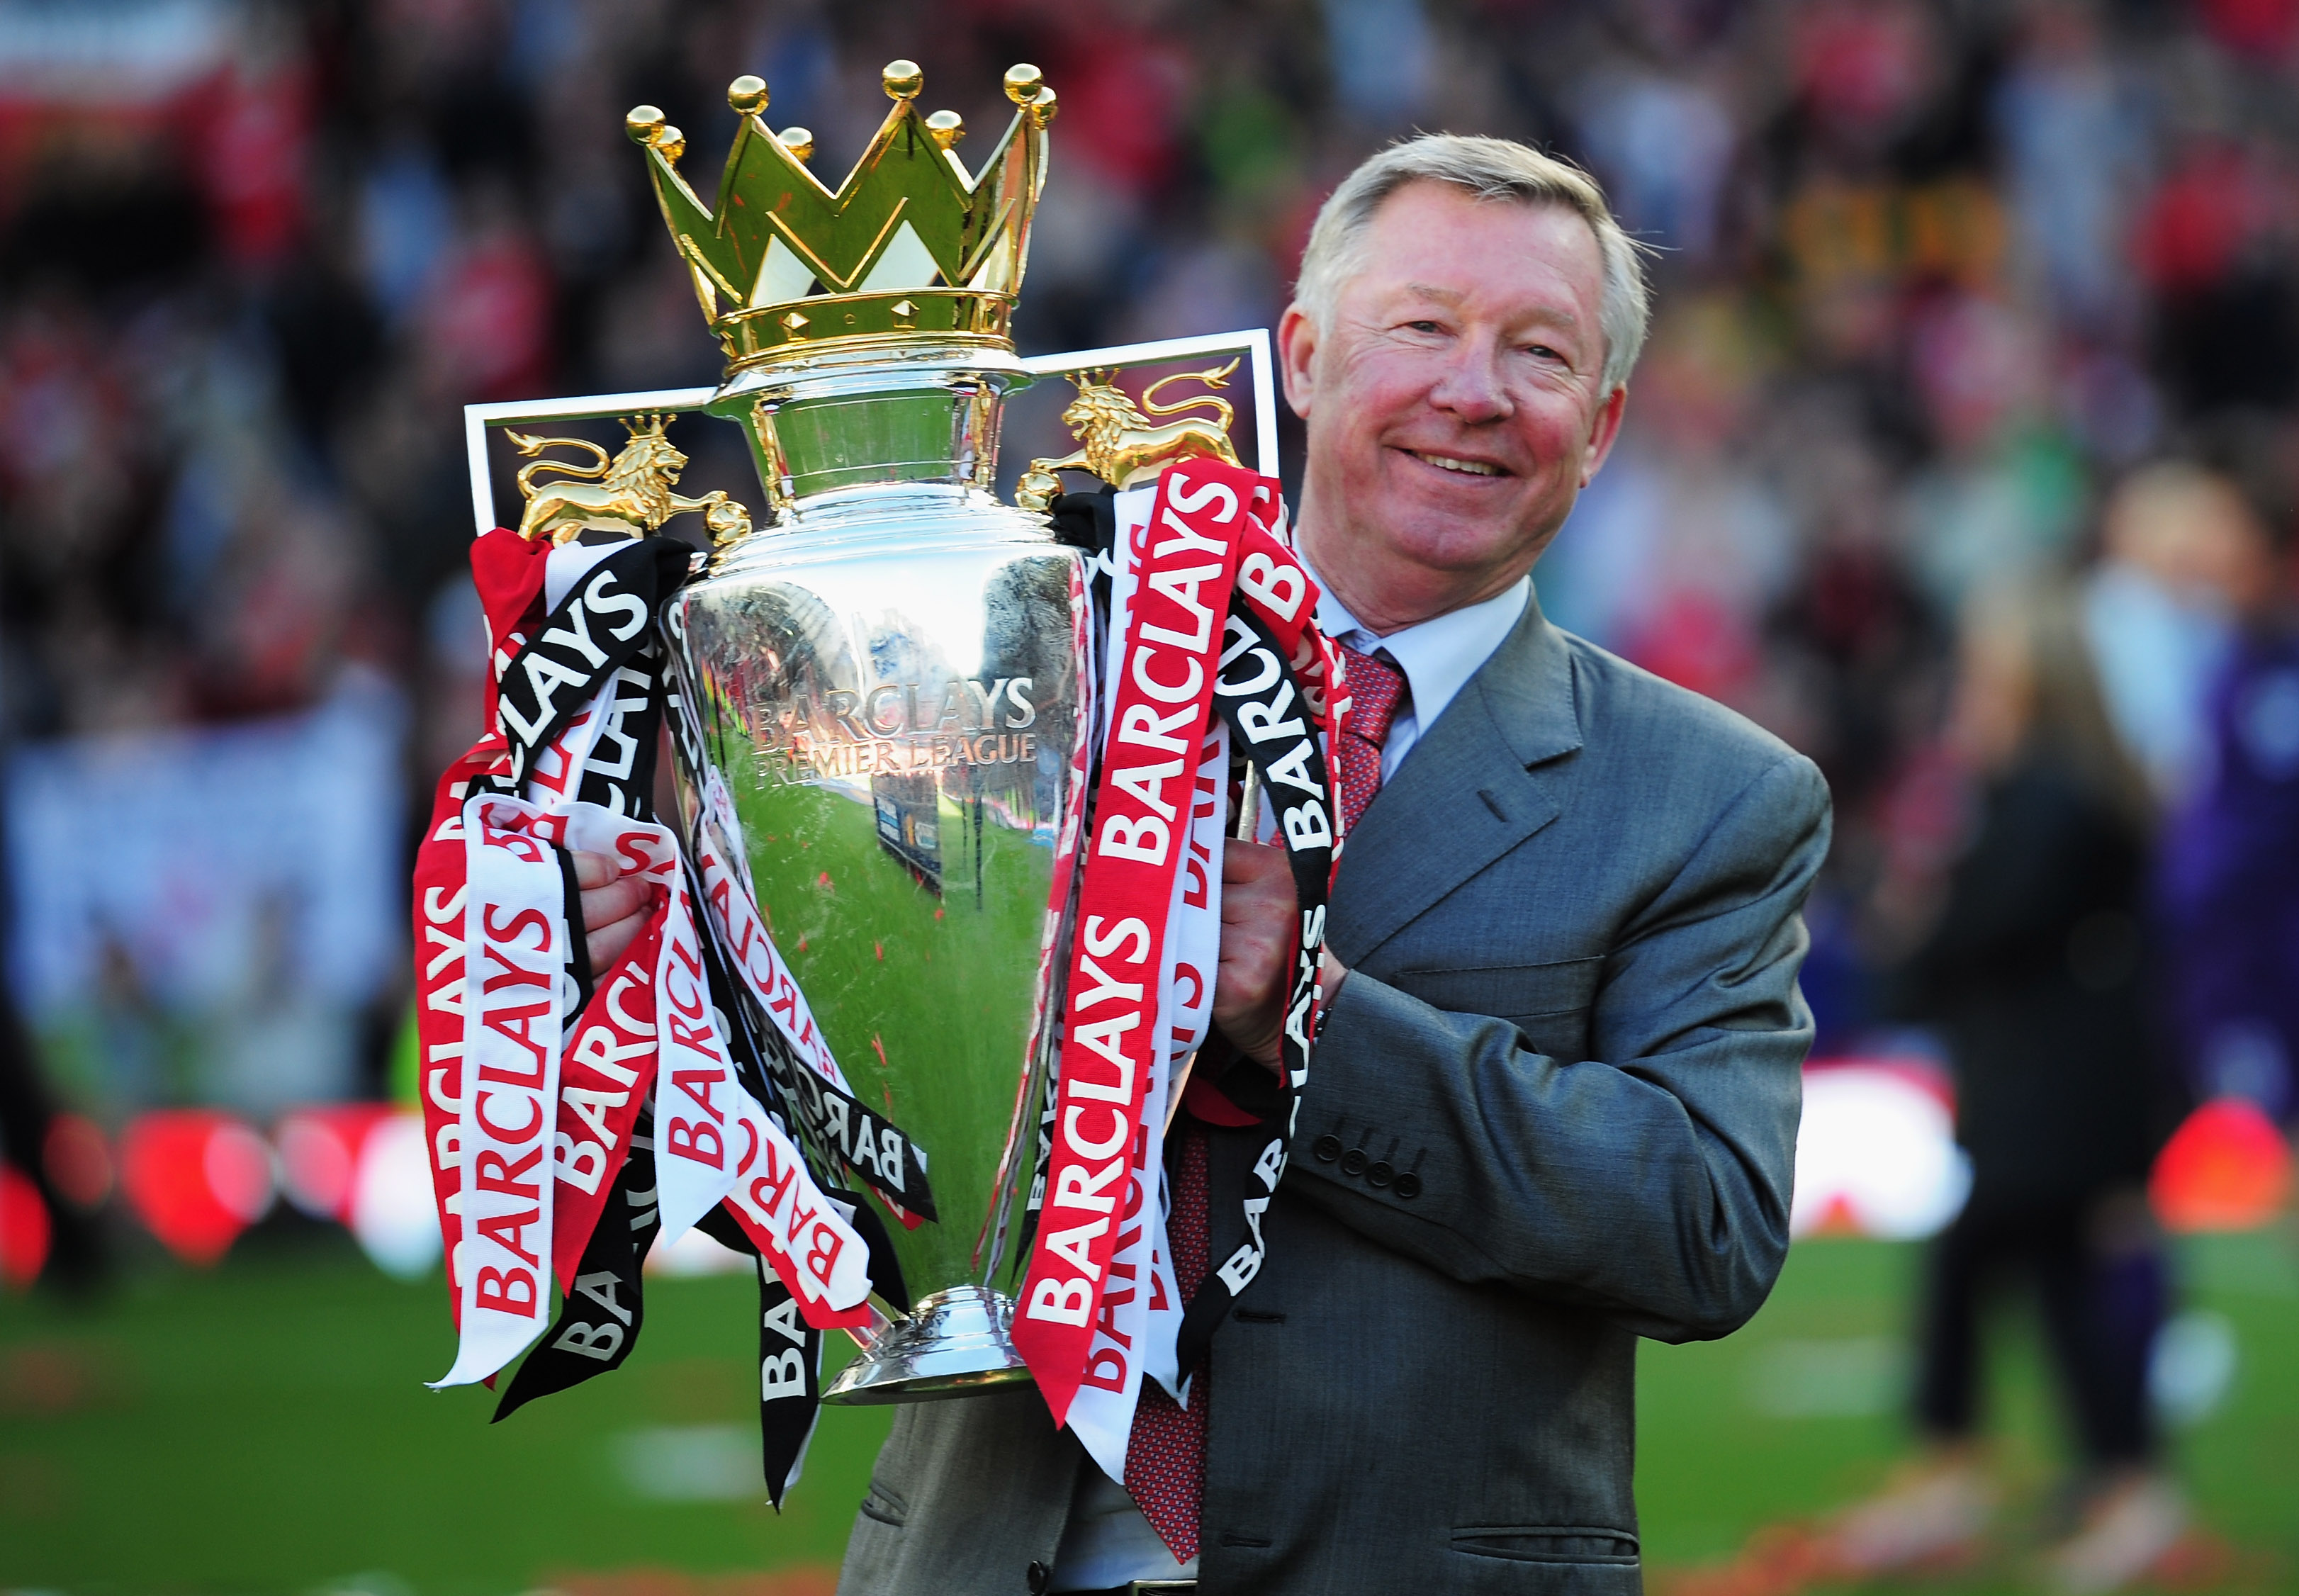 MANCHESTER, ENGLAND - MAY 22:  Sir Alex Ferguson manager of Manchester United lifts the Premier League trophy after the Barclays Premier League match between Manchester United and Blackpool at Old Trafford on May 22, 2011 in Manchester, England. Mancheste